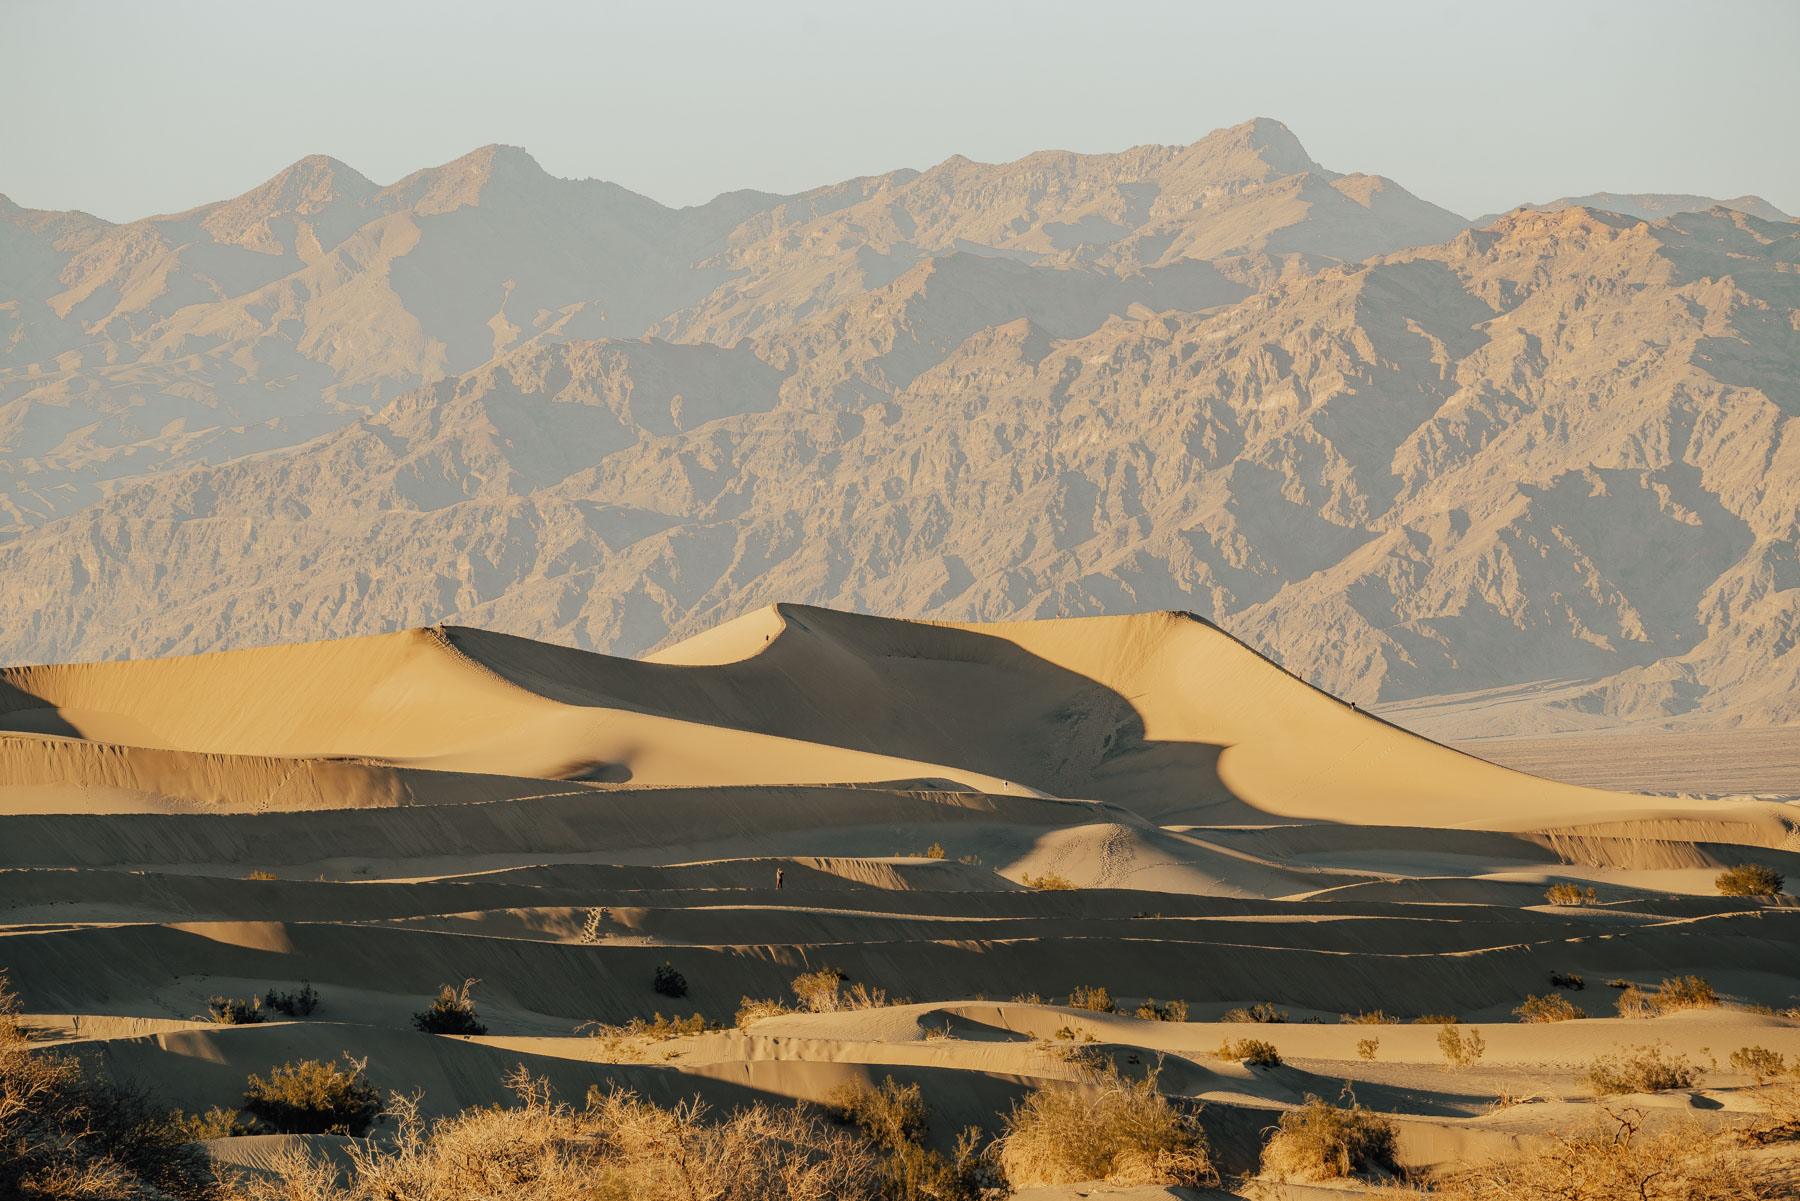 Mesquite Sand Dunes in Death Valley National Park